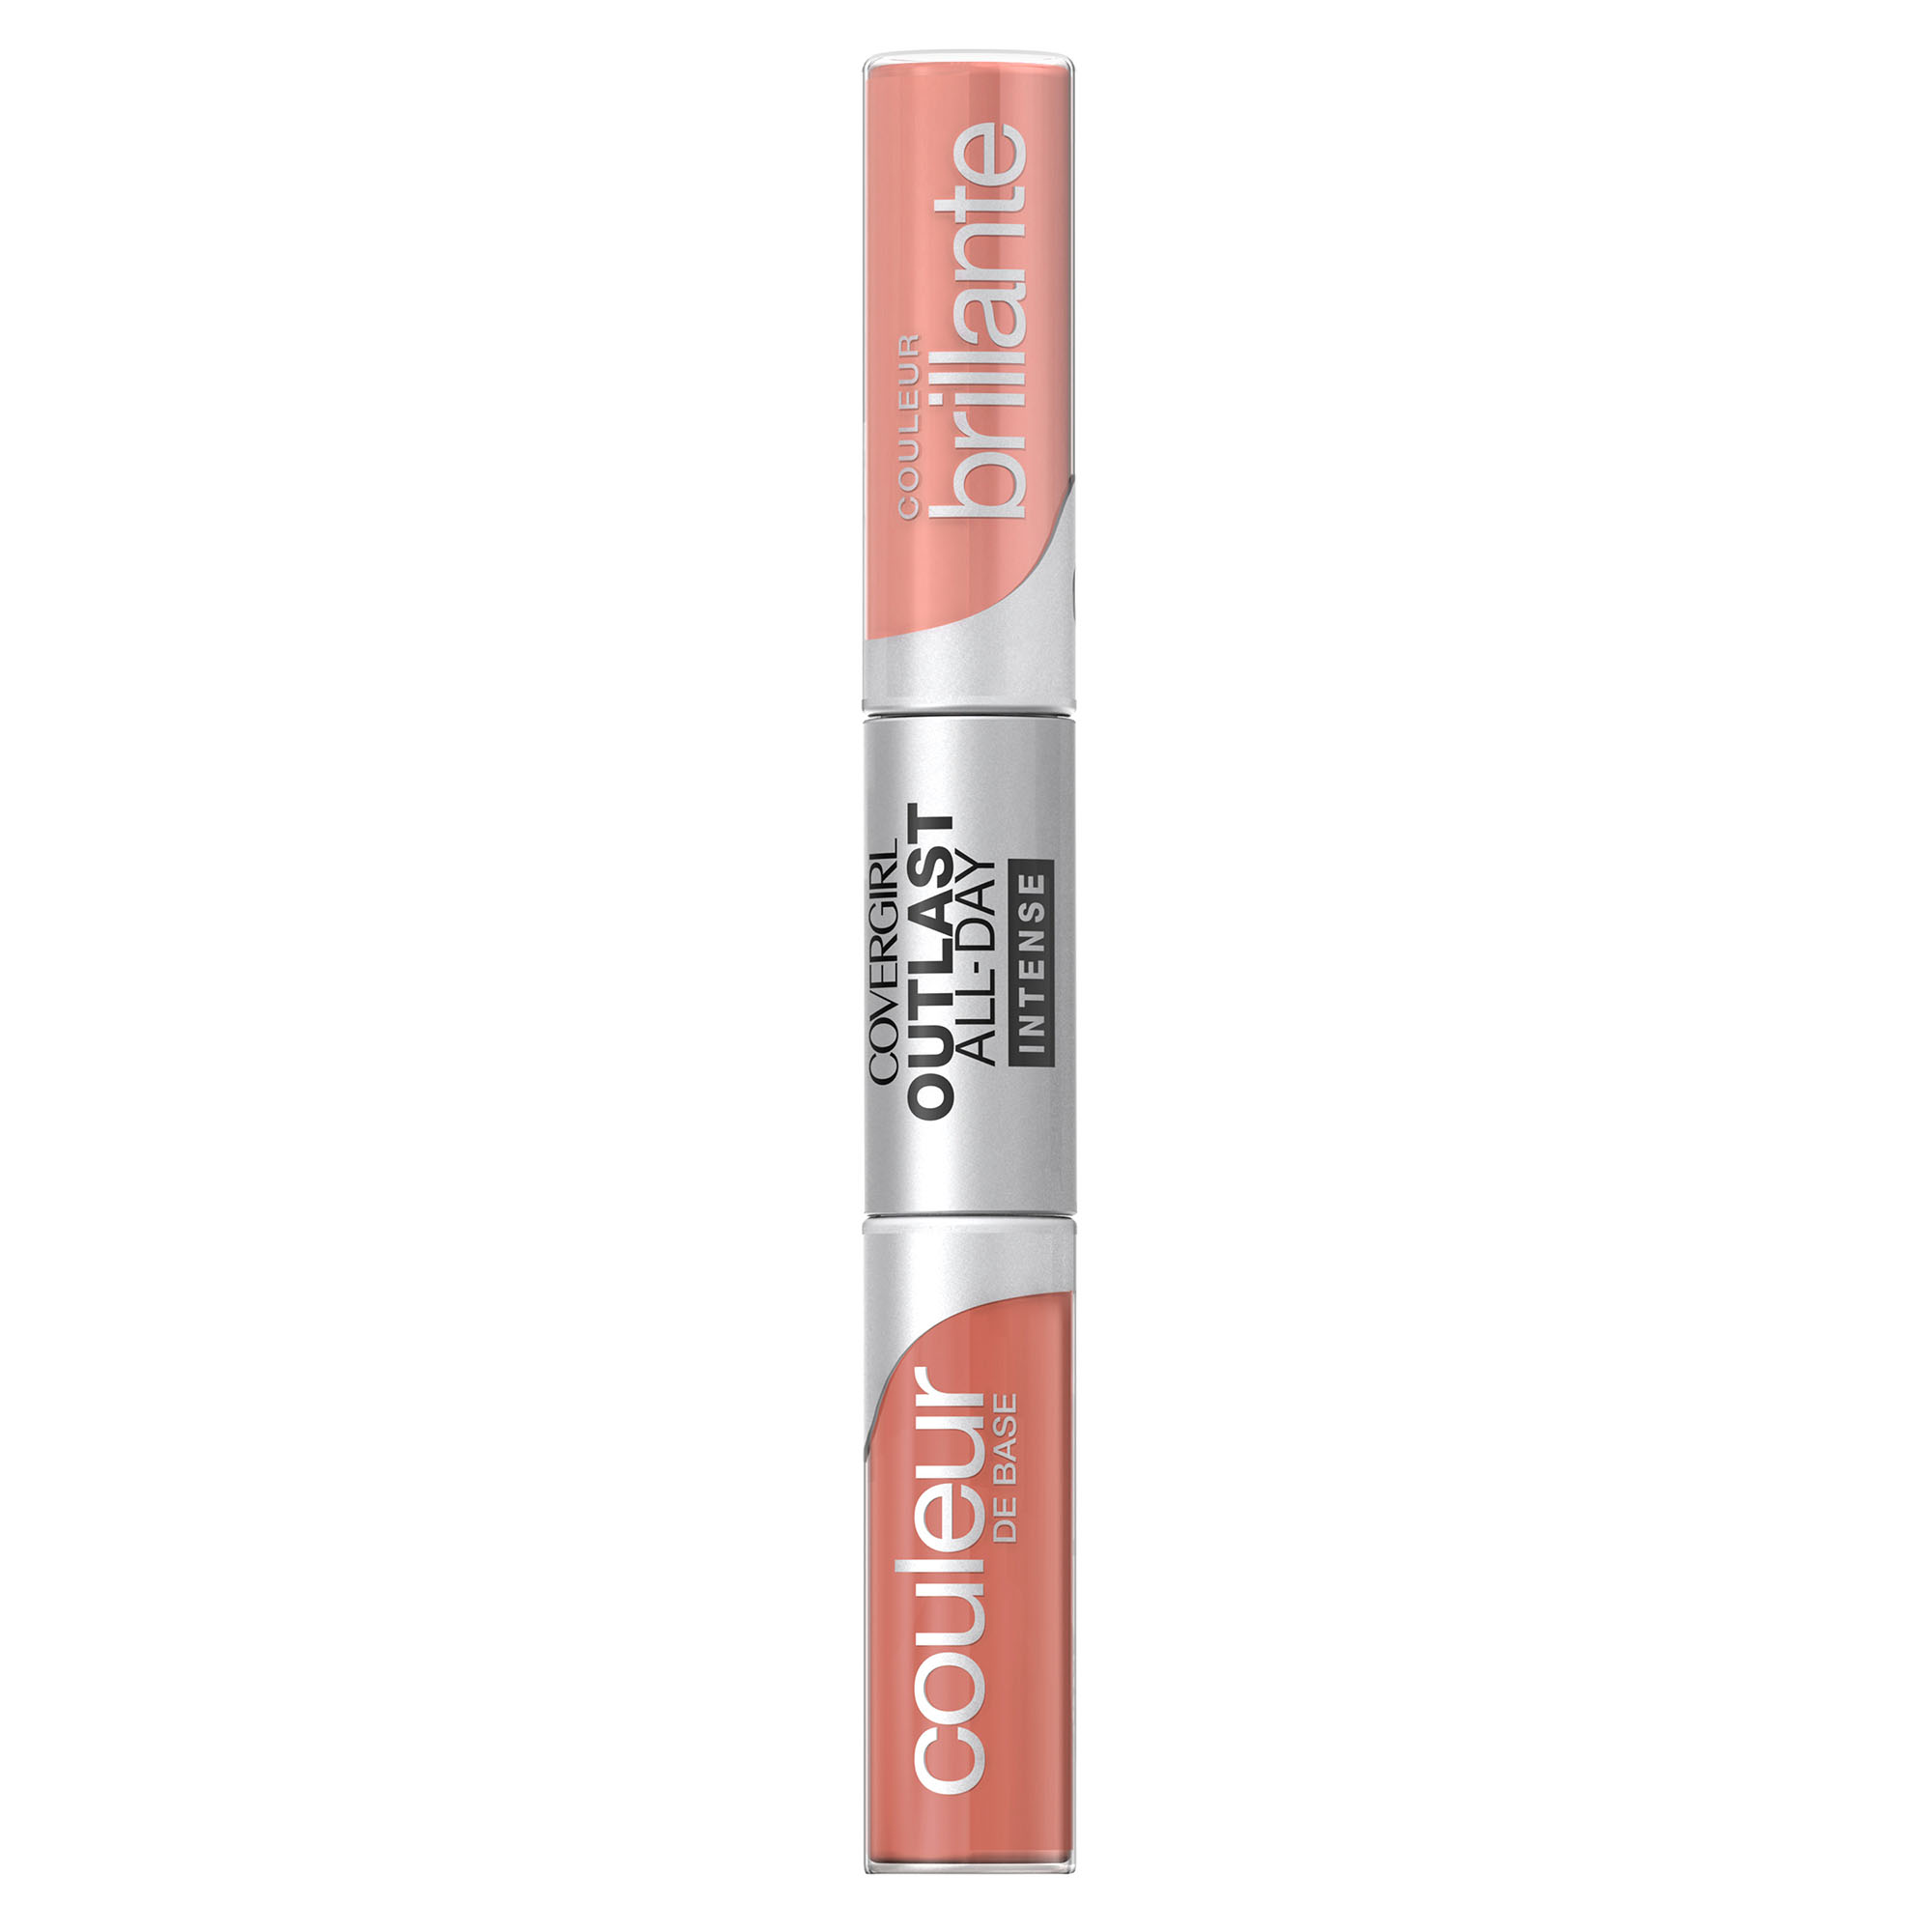 COVERGIRL Outlast All-Day Intense Base Lip Color & Color Gloss, Nude Intensity, .2 oz - image 2 of 4